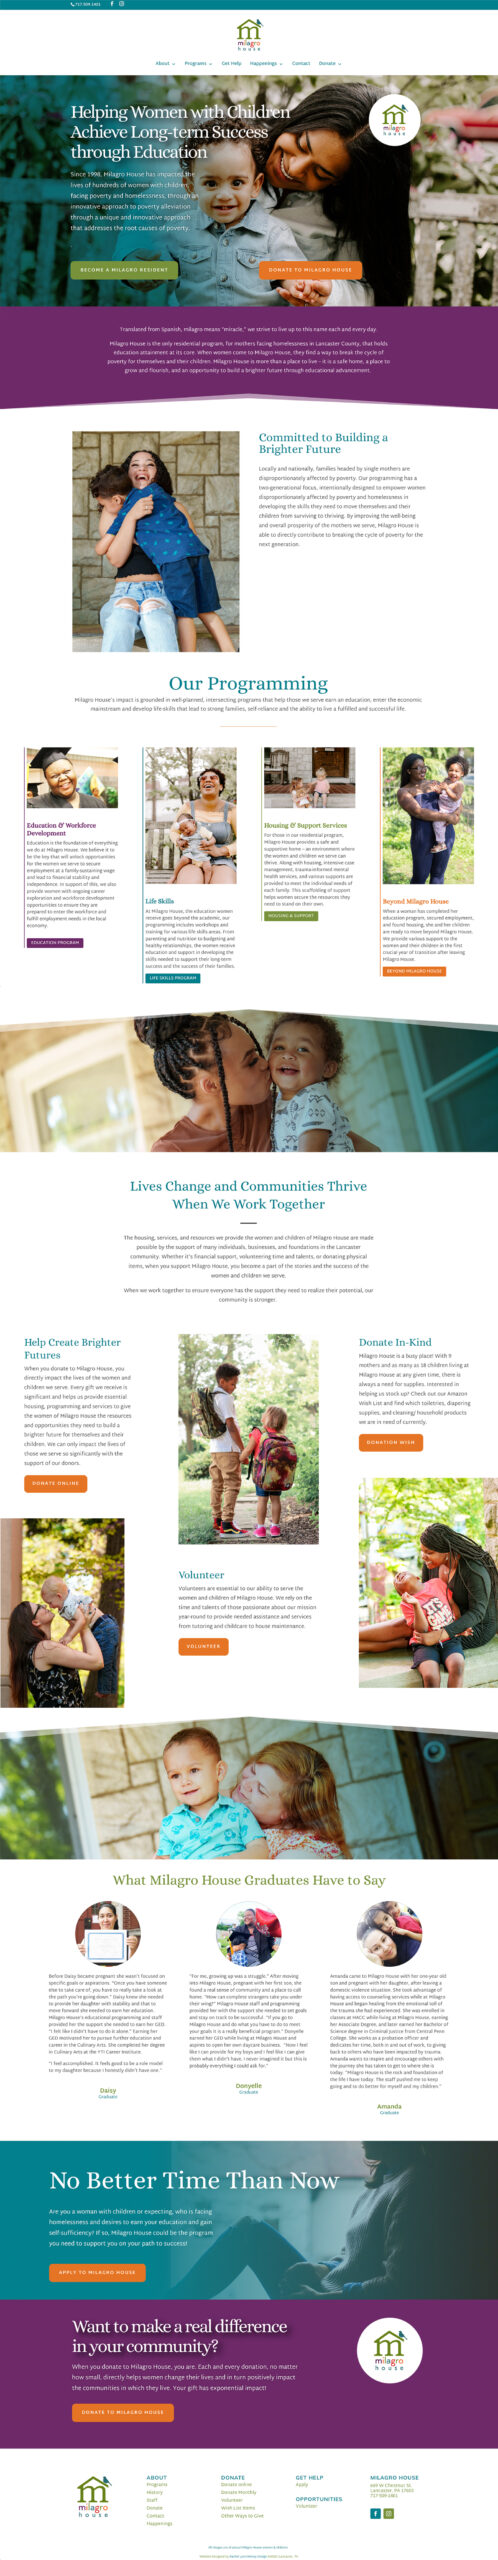 Homepage Milagro House Lancaster, PA Nonprofit Website Redesigned by Lancaster, PA Graphic Designer & Web Designer Rachel Lynn Heisey Website Redesign